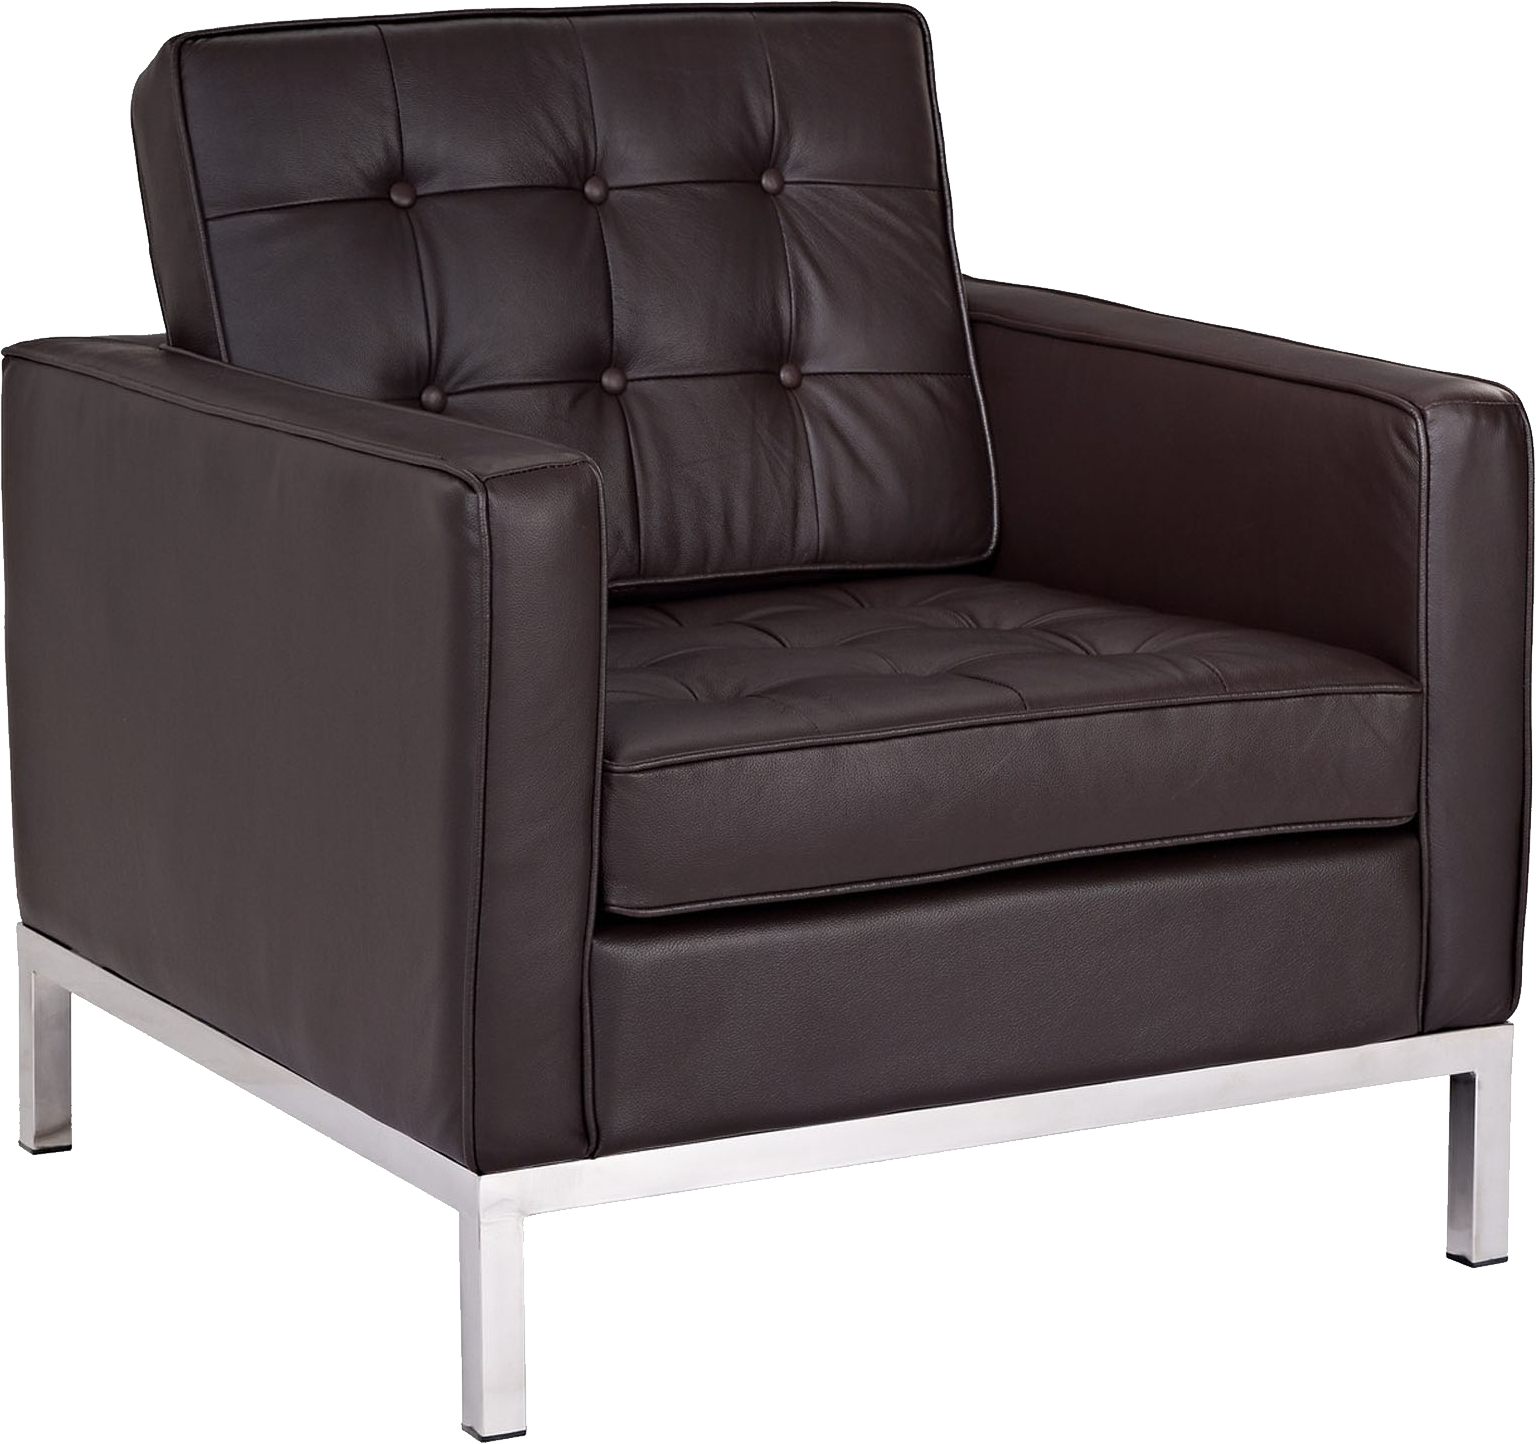 Download PNG image - Accent Chair Transparent PNG 